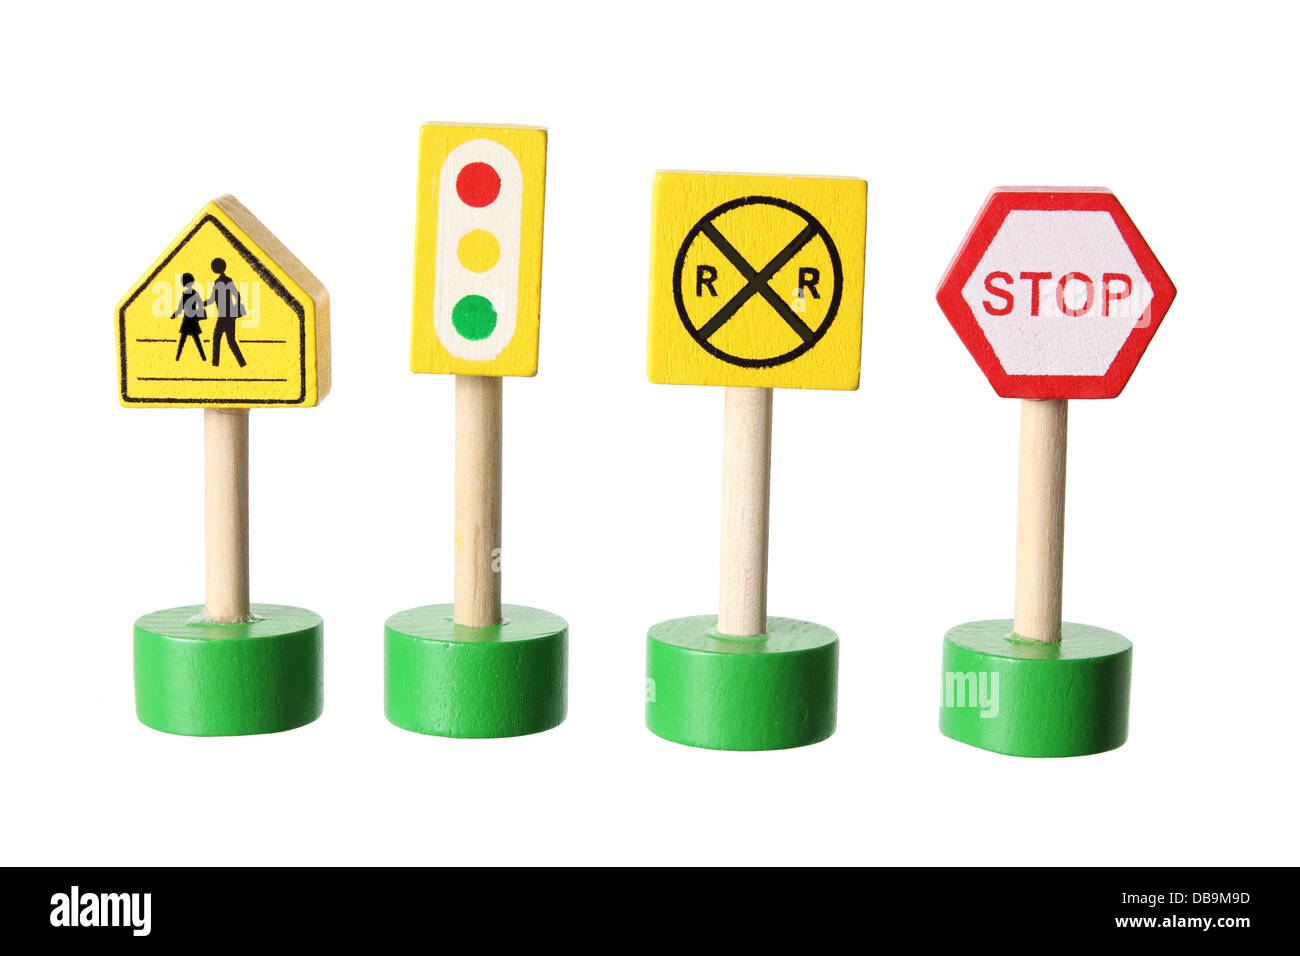 Toy Traffic Signs Stock Photo